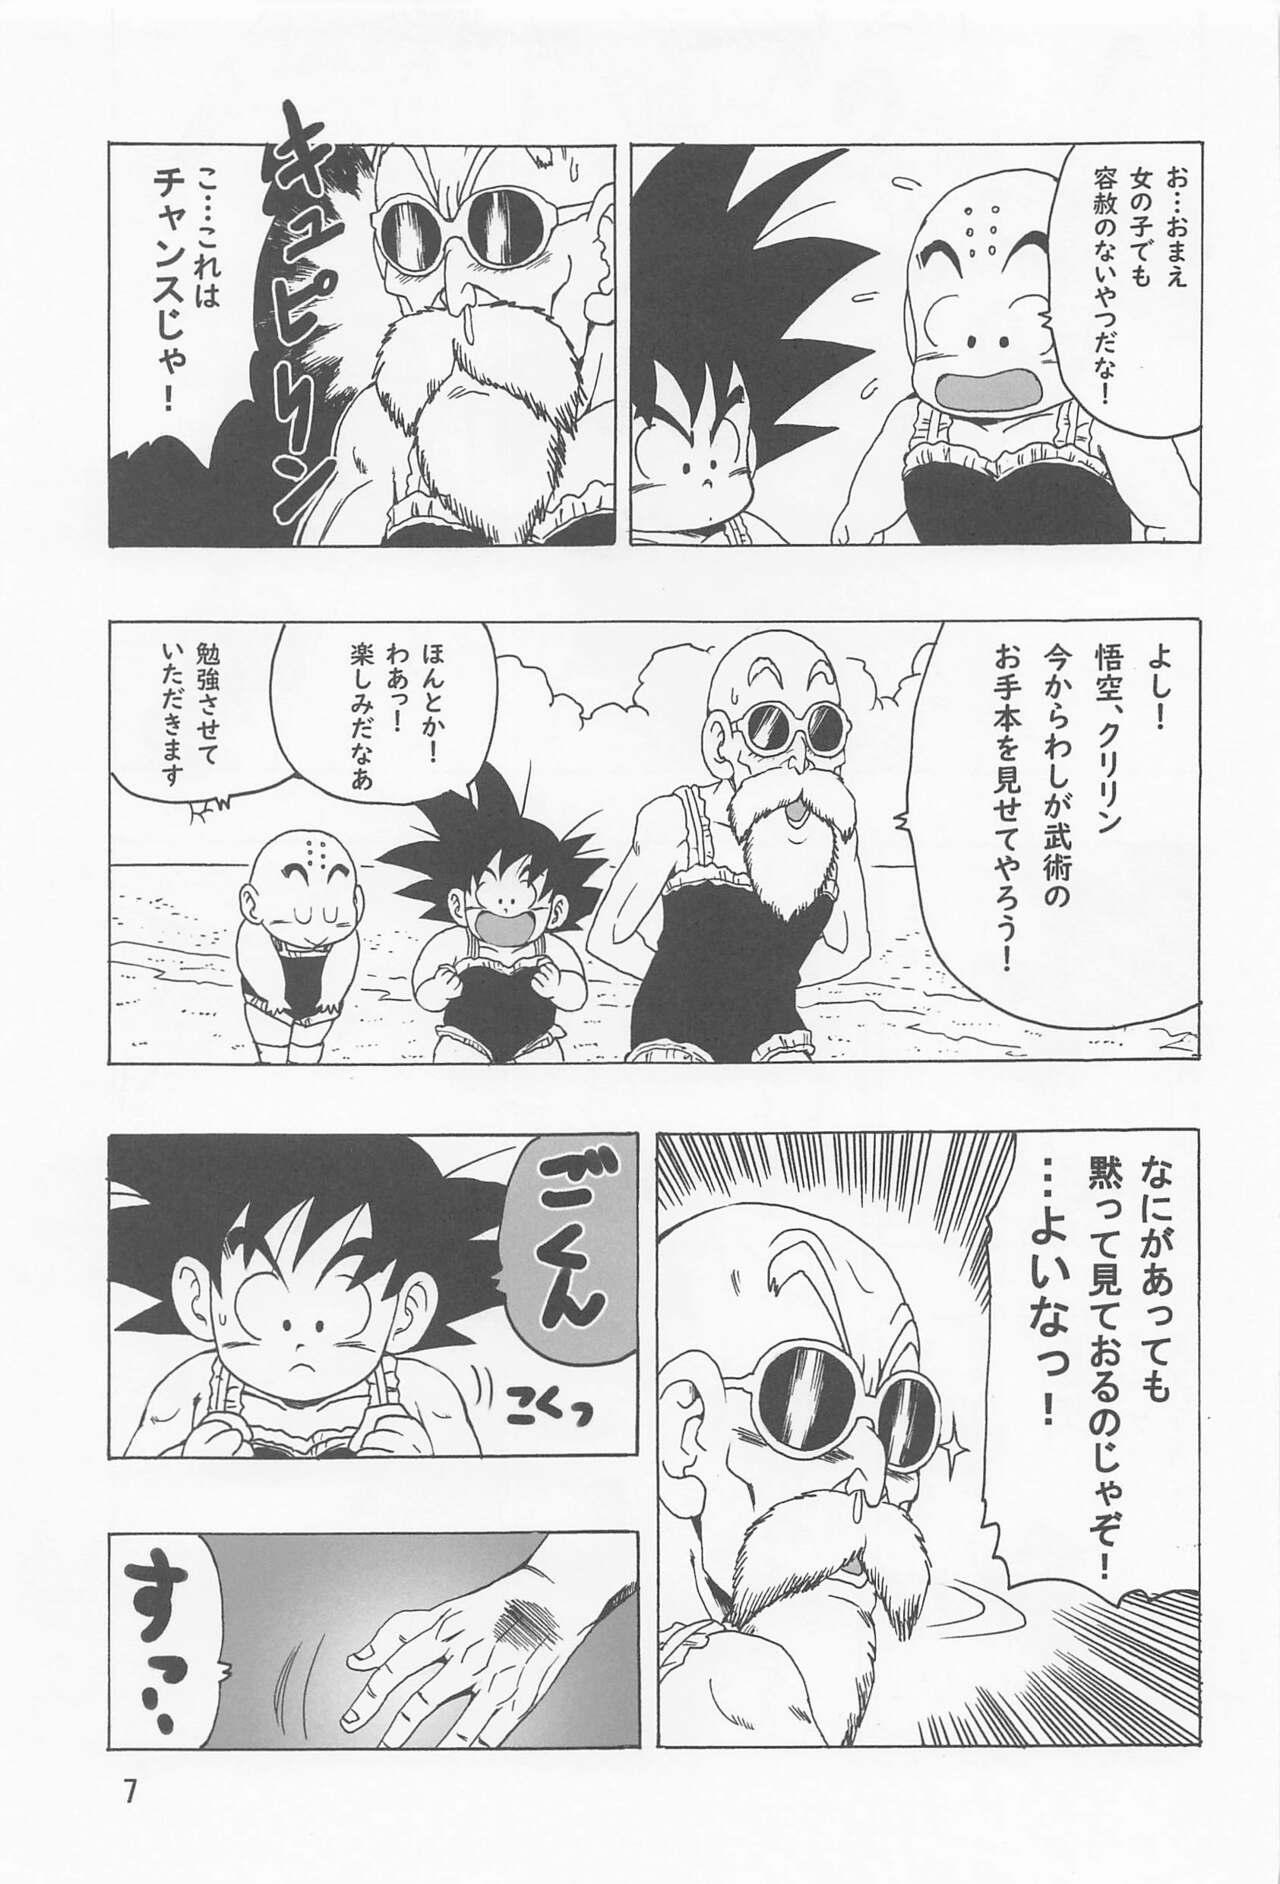 Blowjob Episode of Lunch 1 - Dragon ball Peruana - Page 8